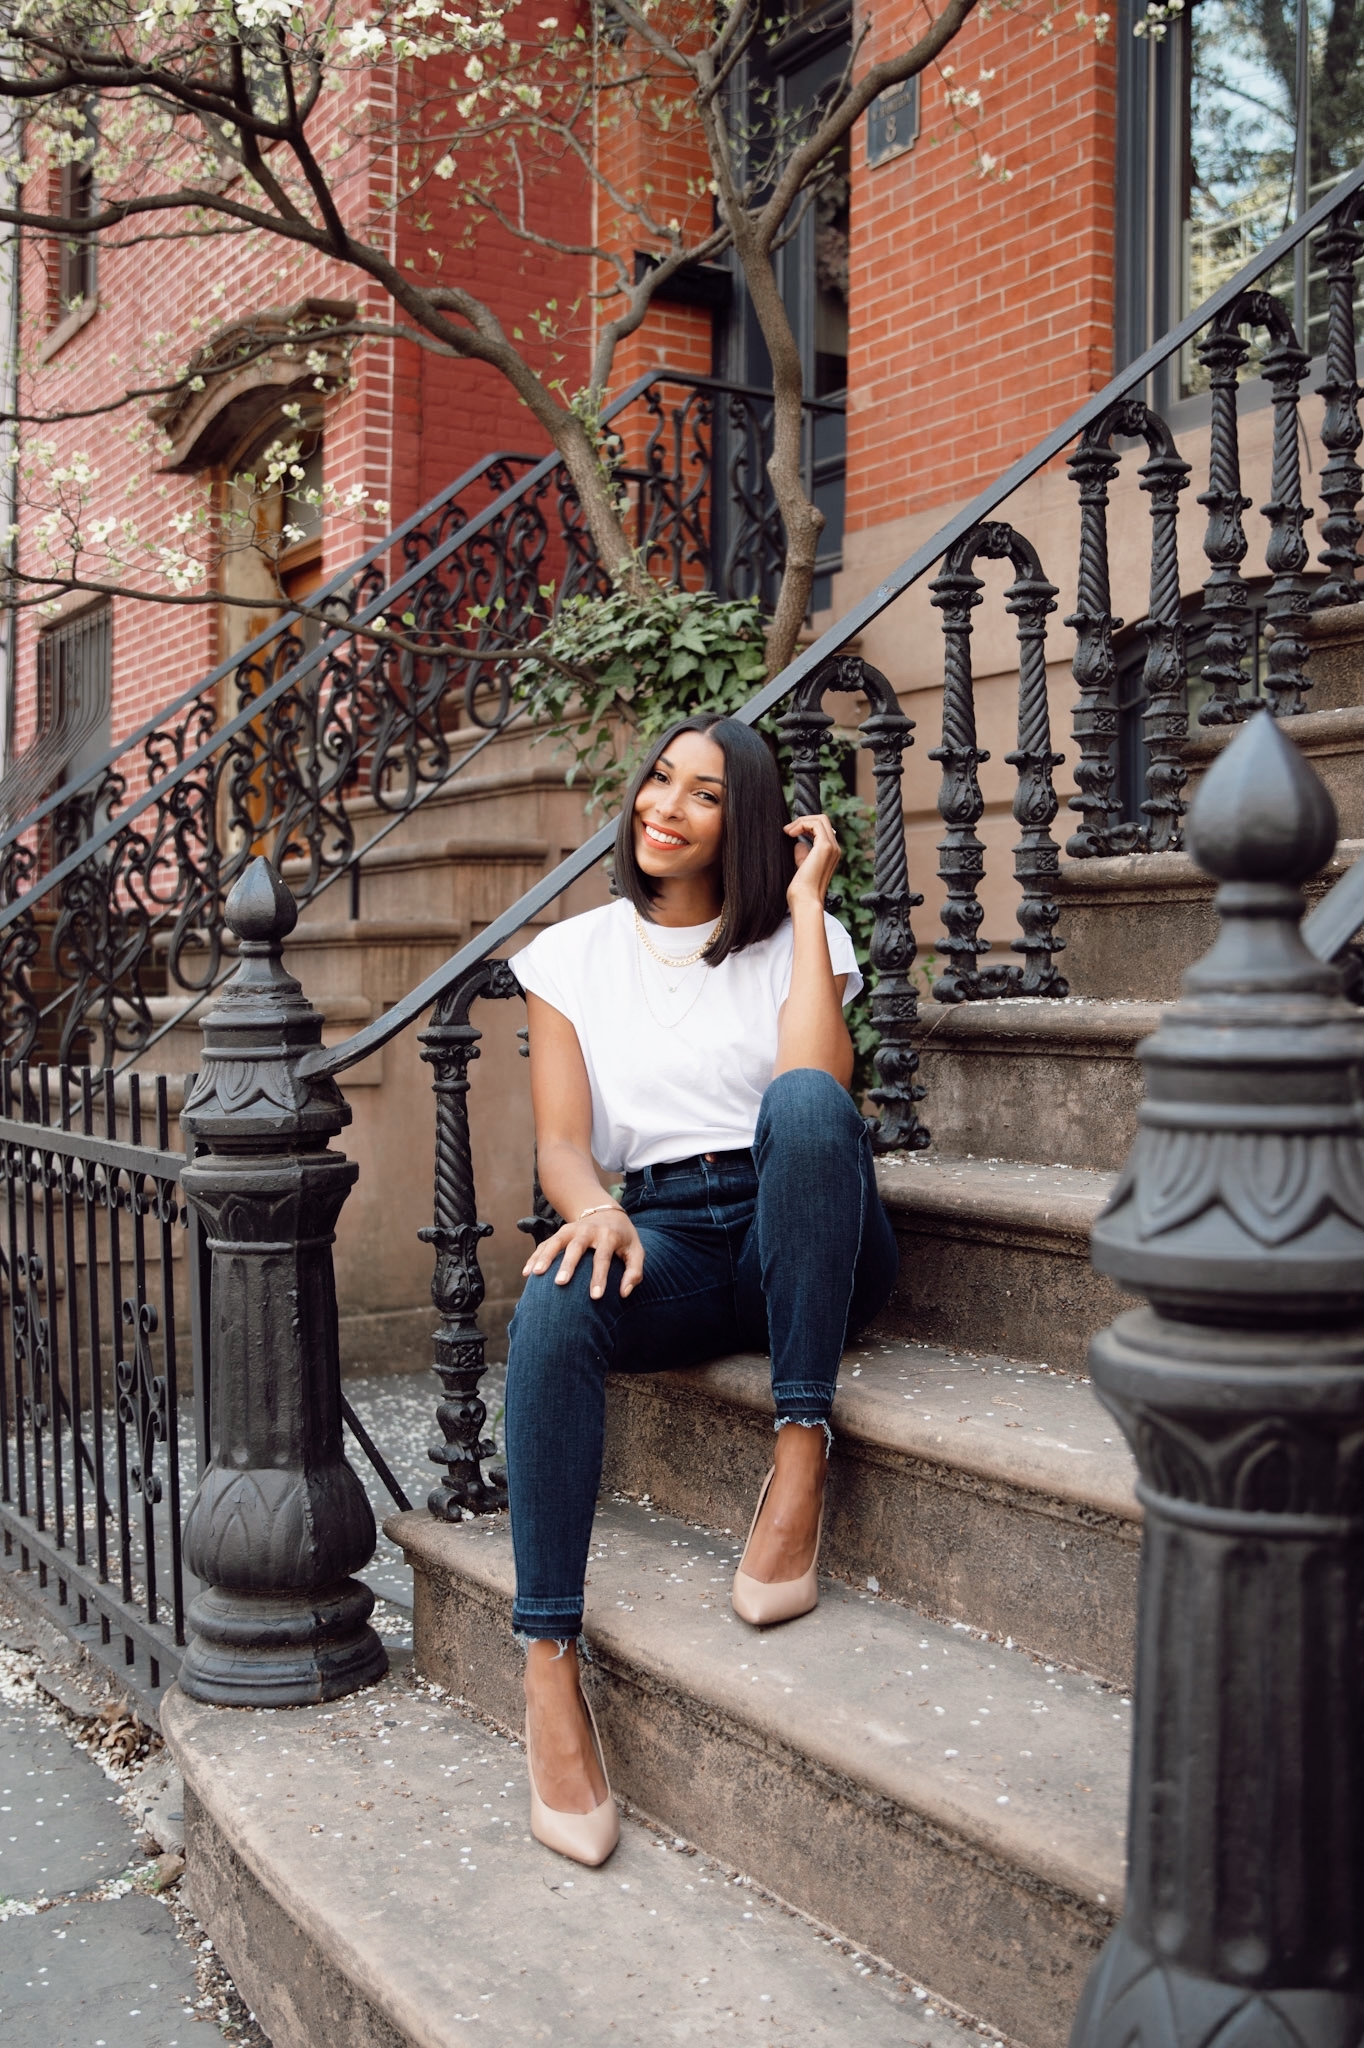 How to Effortlessly Update Your T-shirt and Jeans Outfit - Love